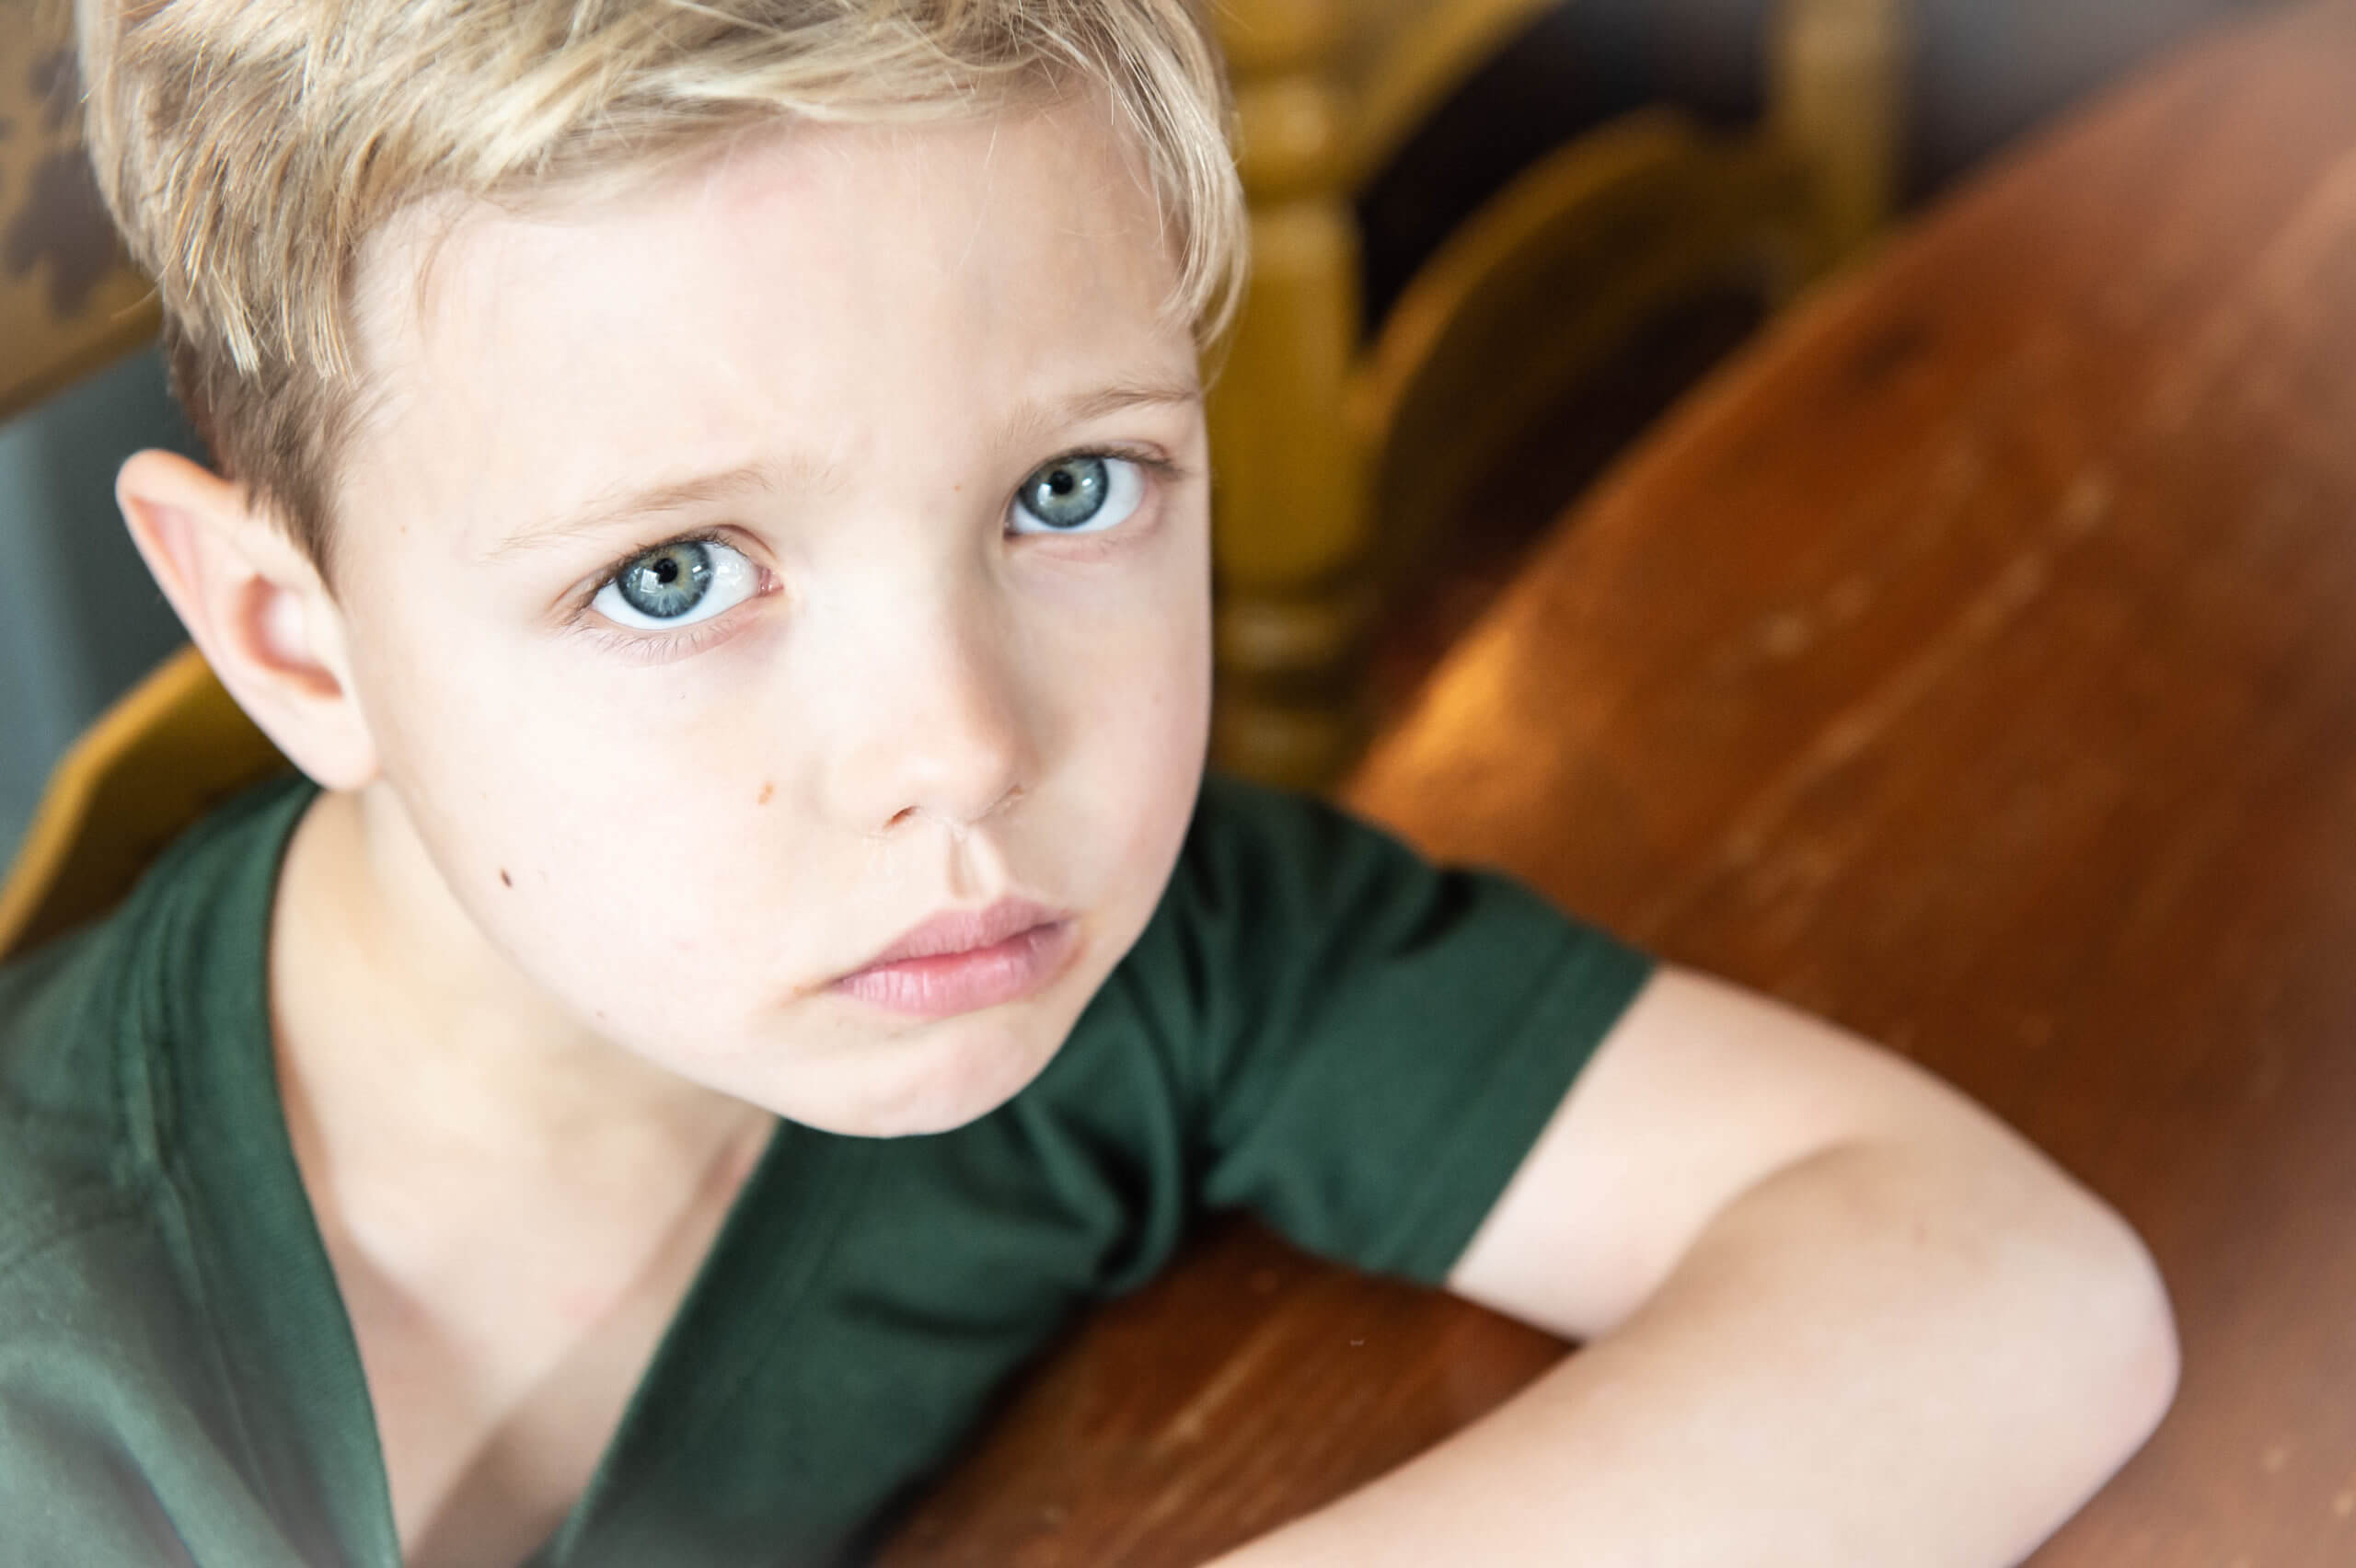 Color photo, close-up of 6 year old white boy with pale skin, blond hair, and green eyes (that match his green shirt) looking at the camera with a sad face.